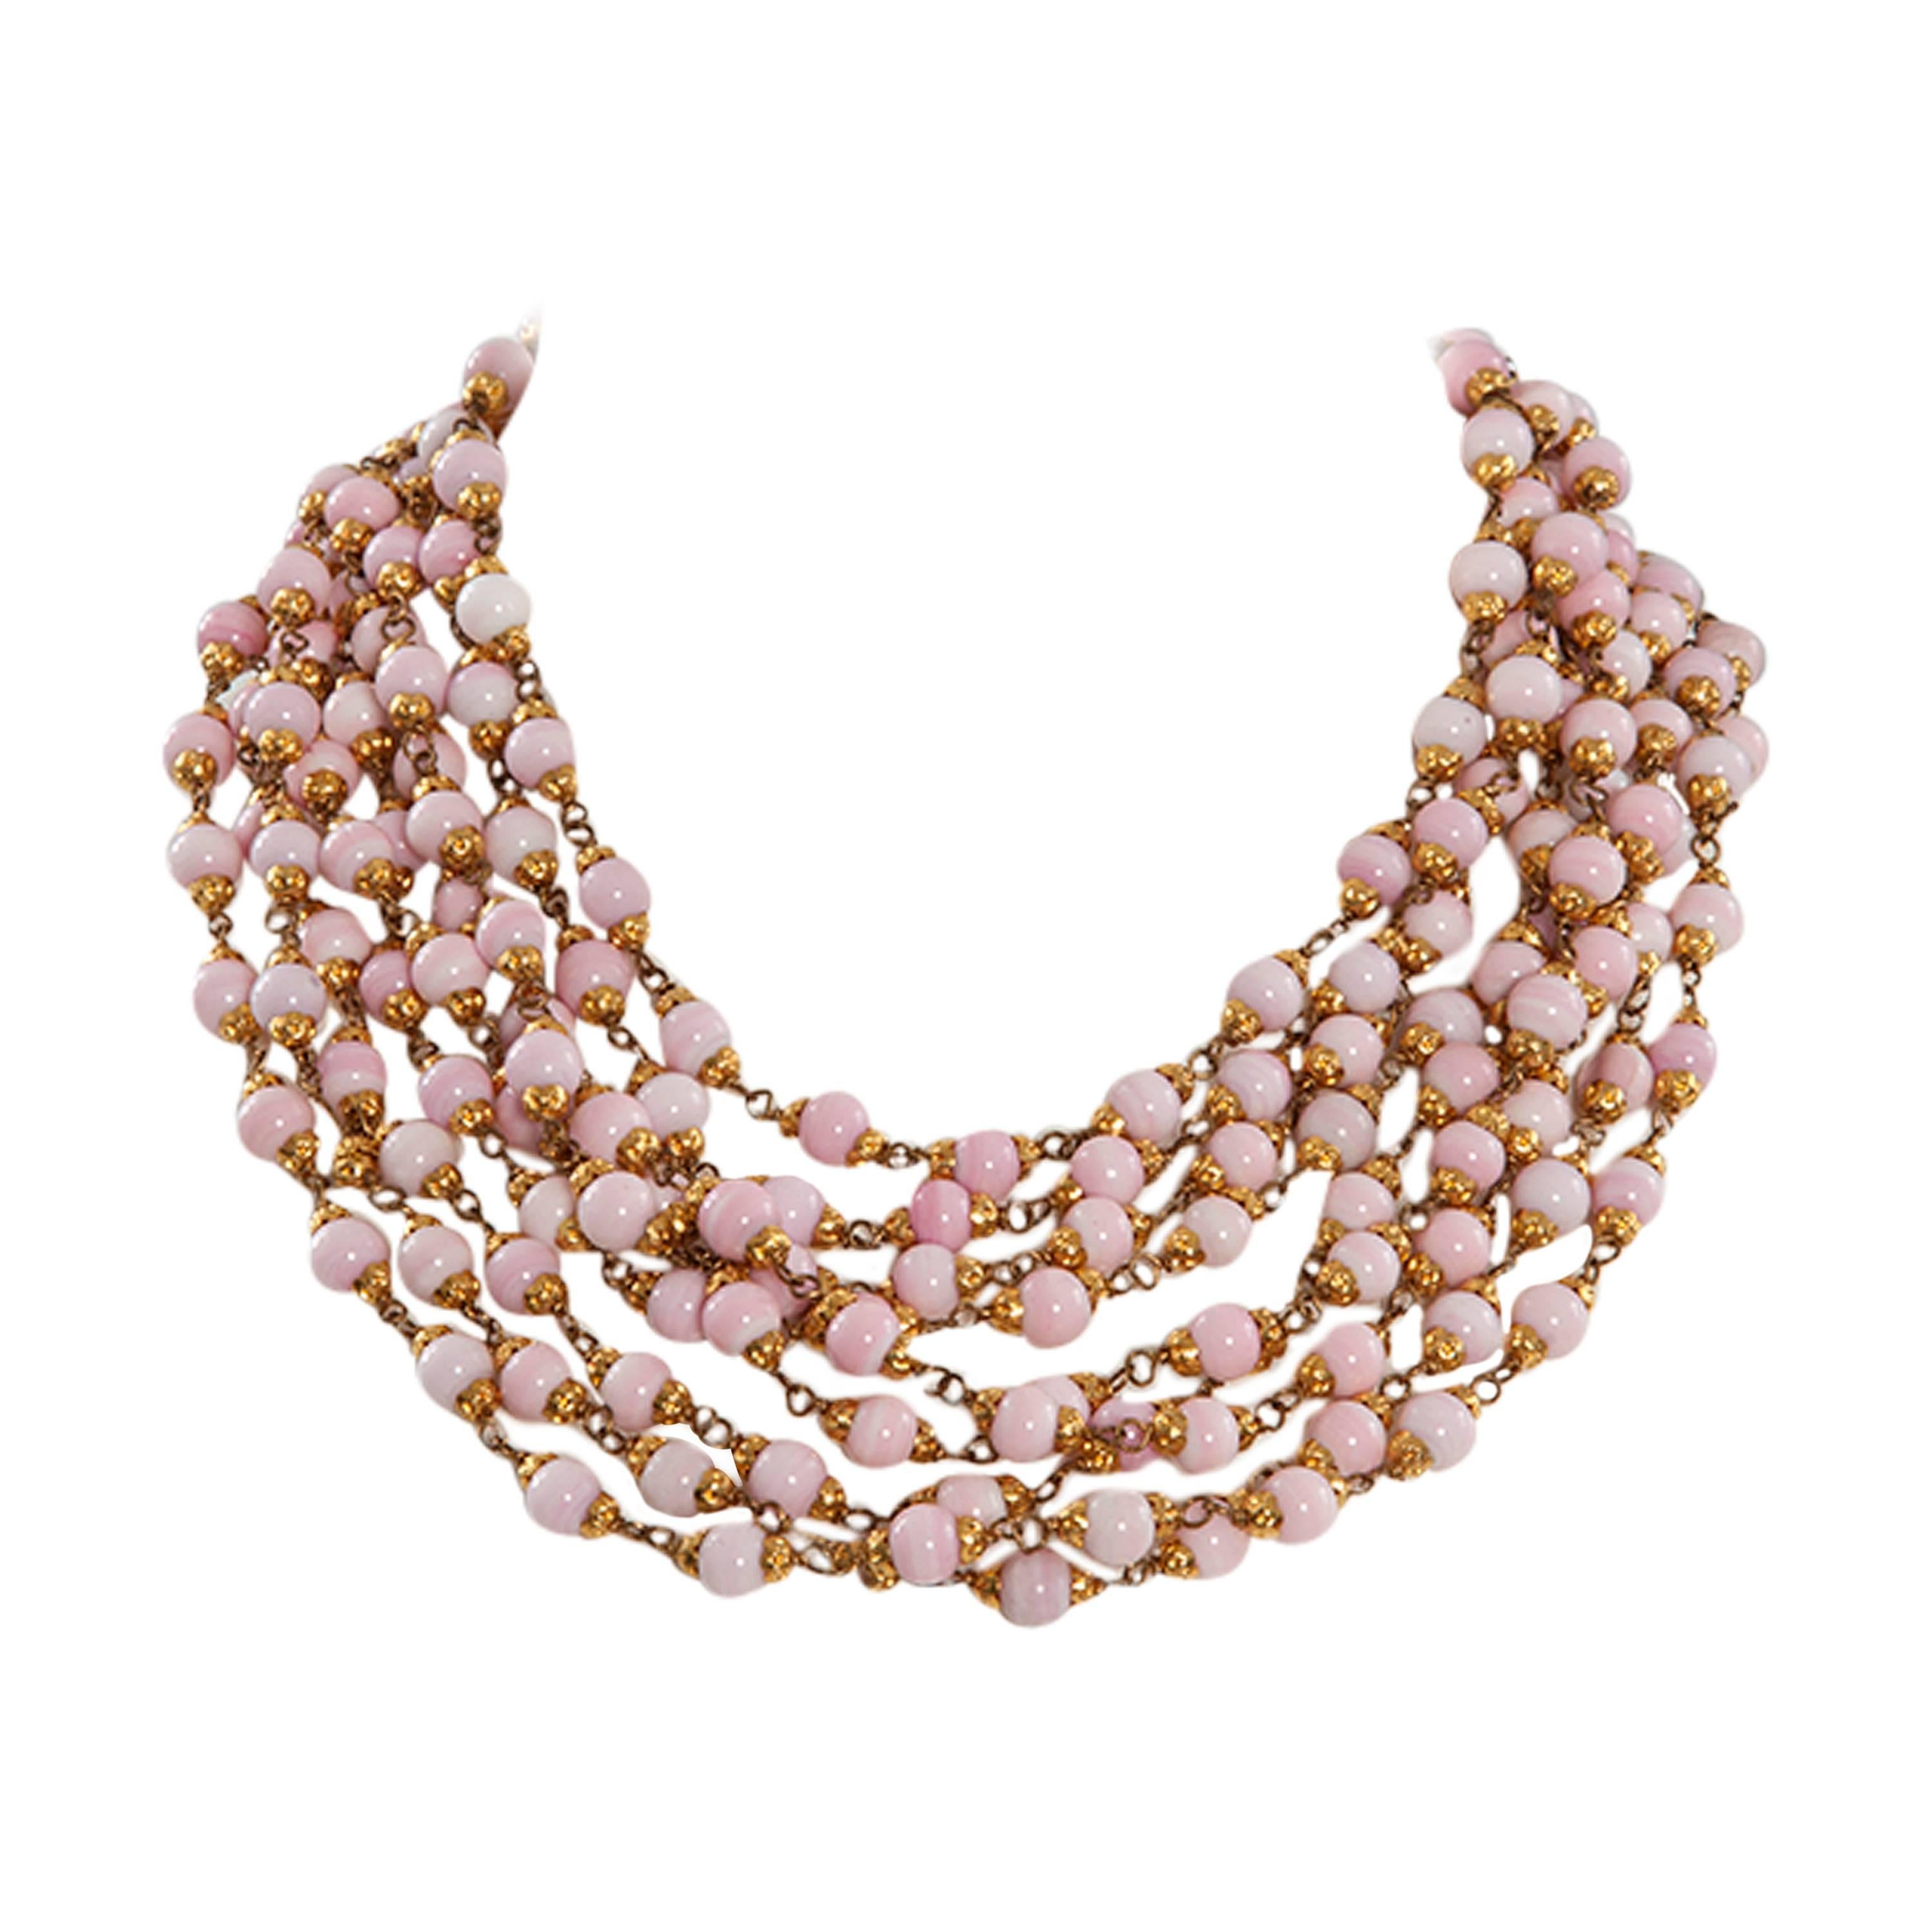 1993 Chanel Angel's Skin Coral Multi-Strand Necklace